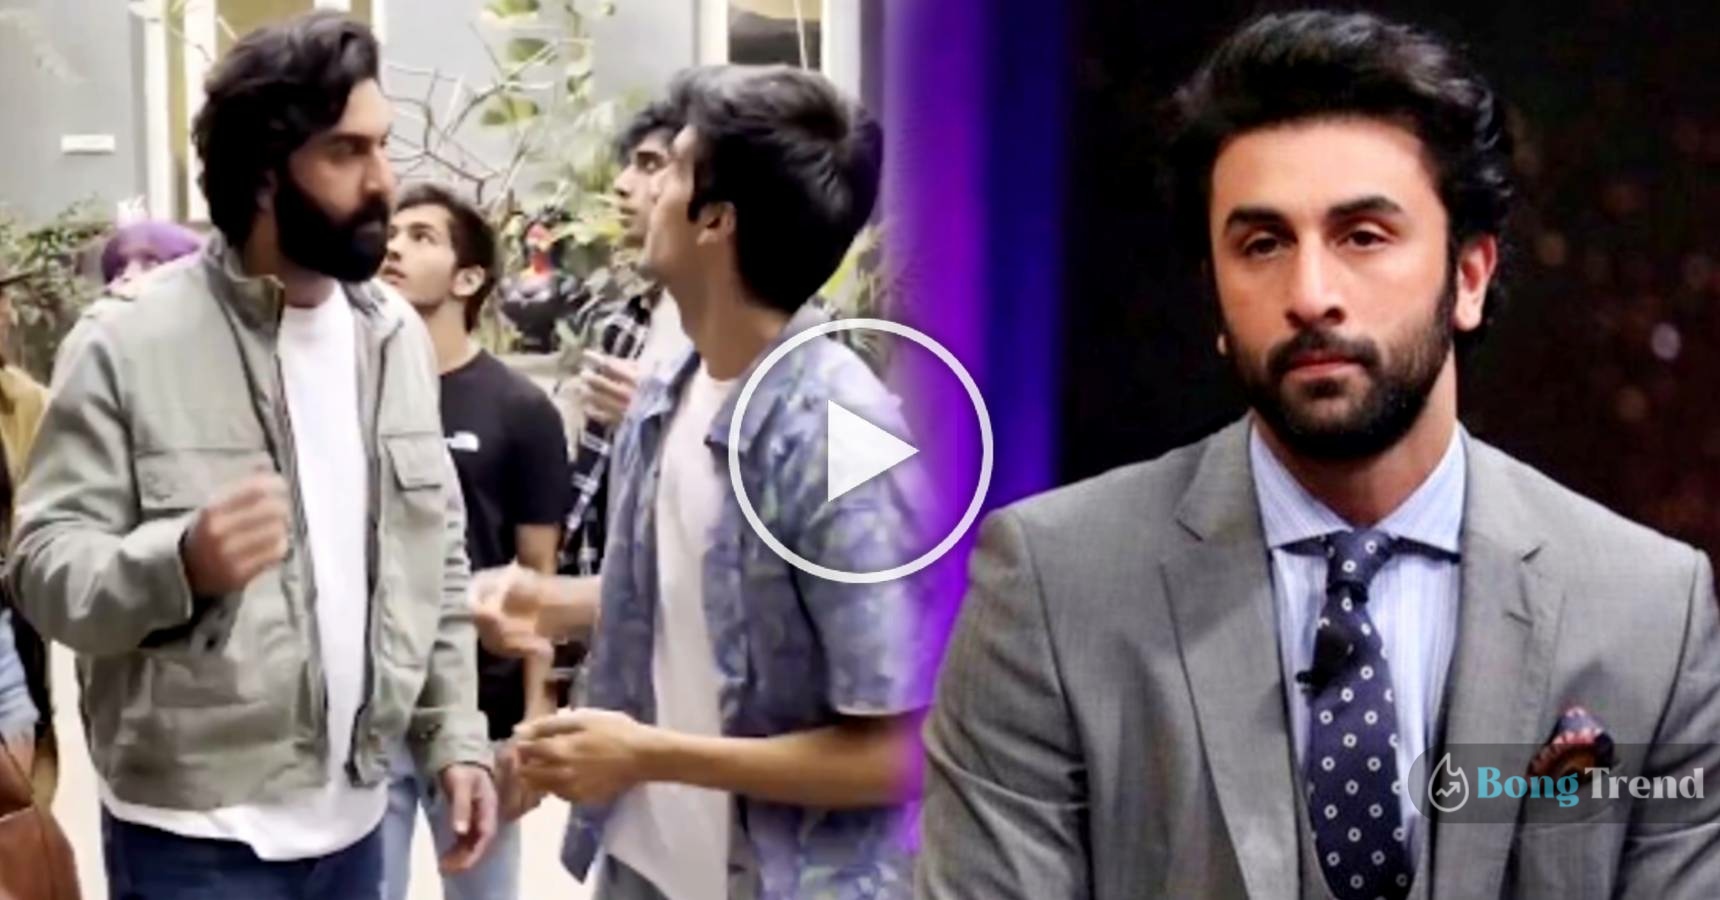 Bollywood actor Ranbir Kapoor throws a fan’s phone, video goes viral